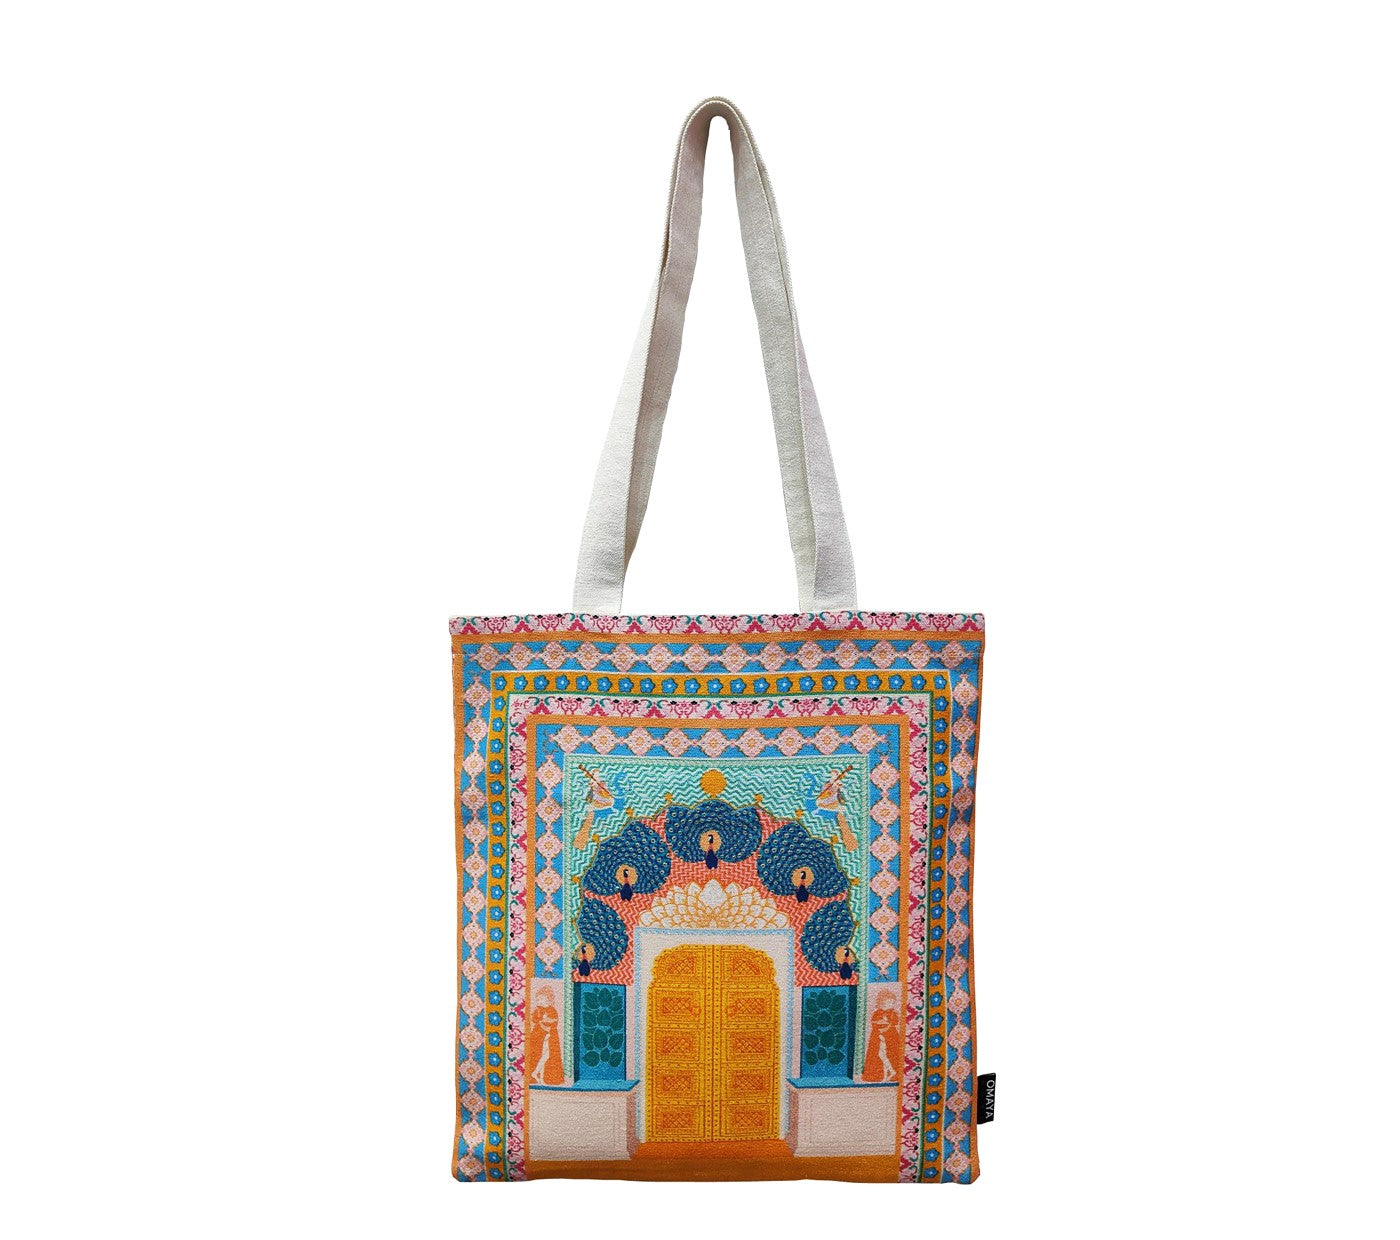 The Peacock Gate Tote Bag 34x36 cm.